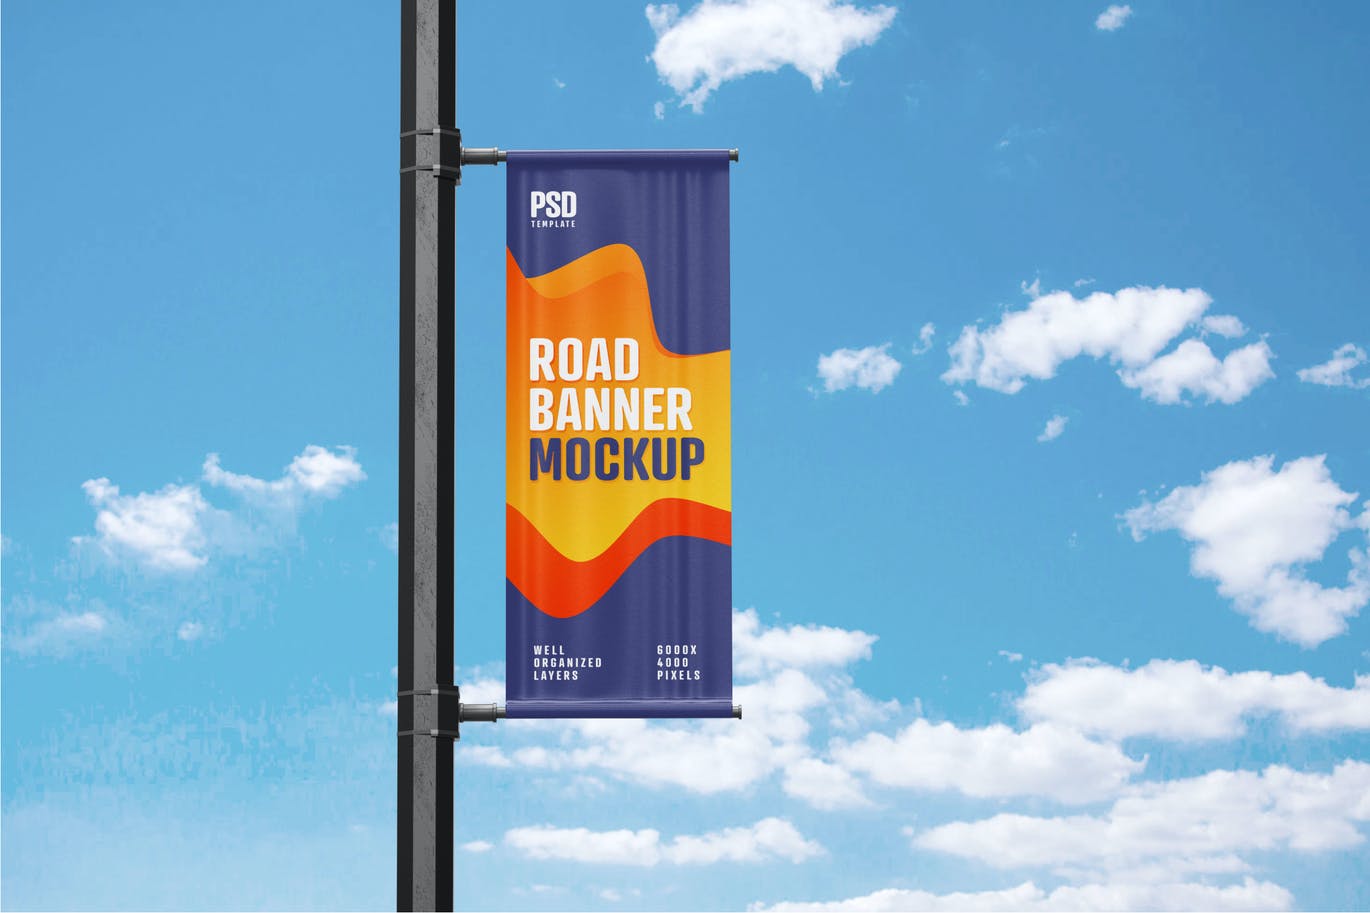 A road banner on lamp mockup